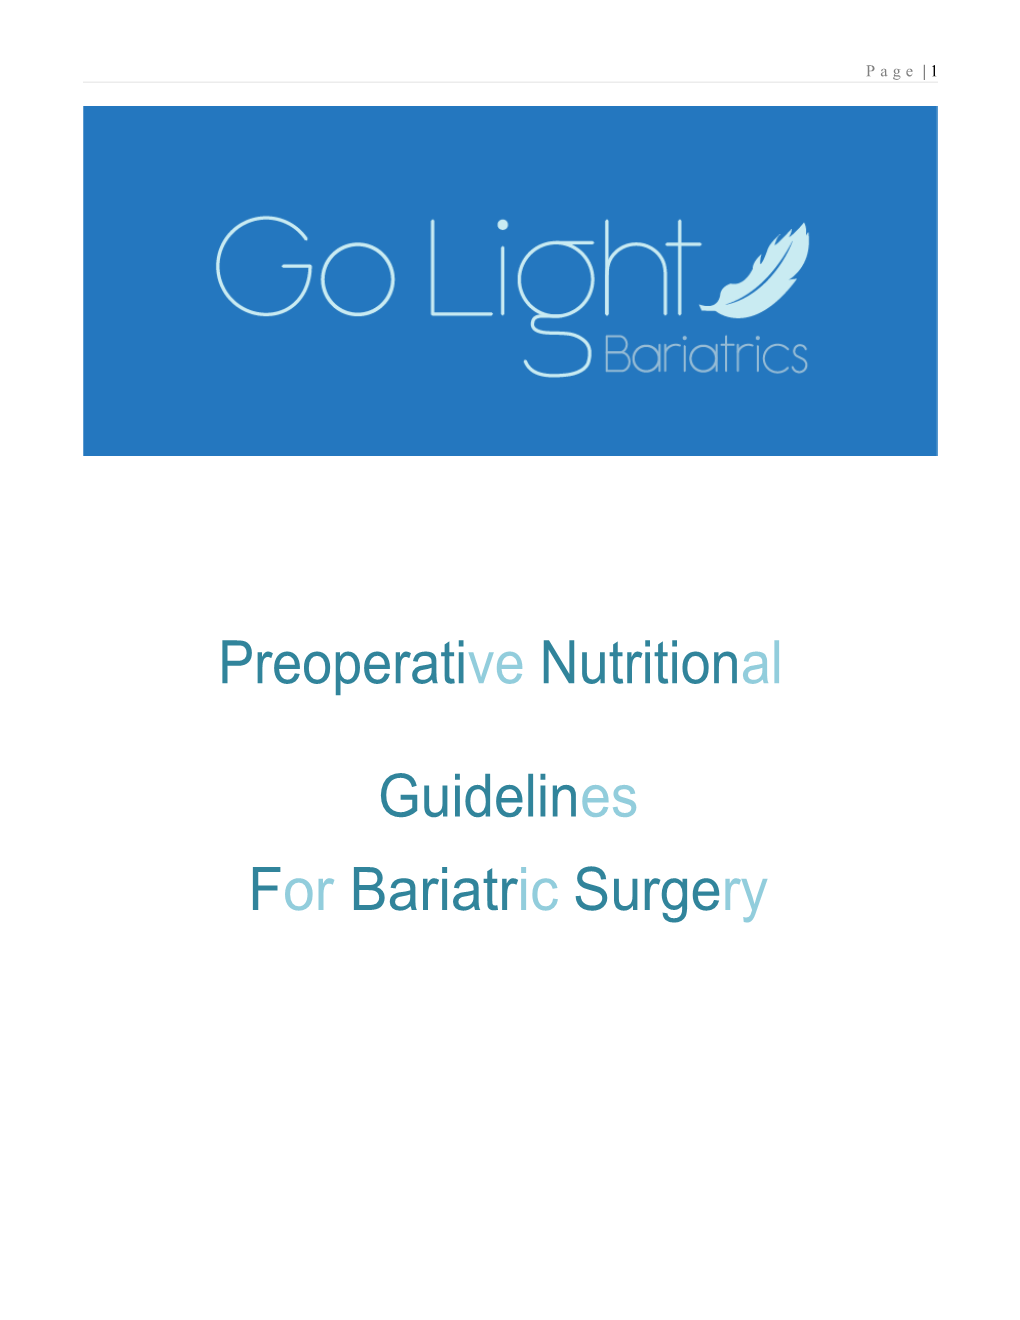 Preoperative Nutritional